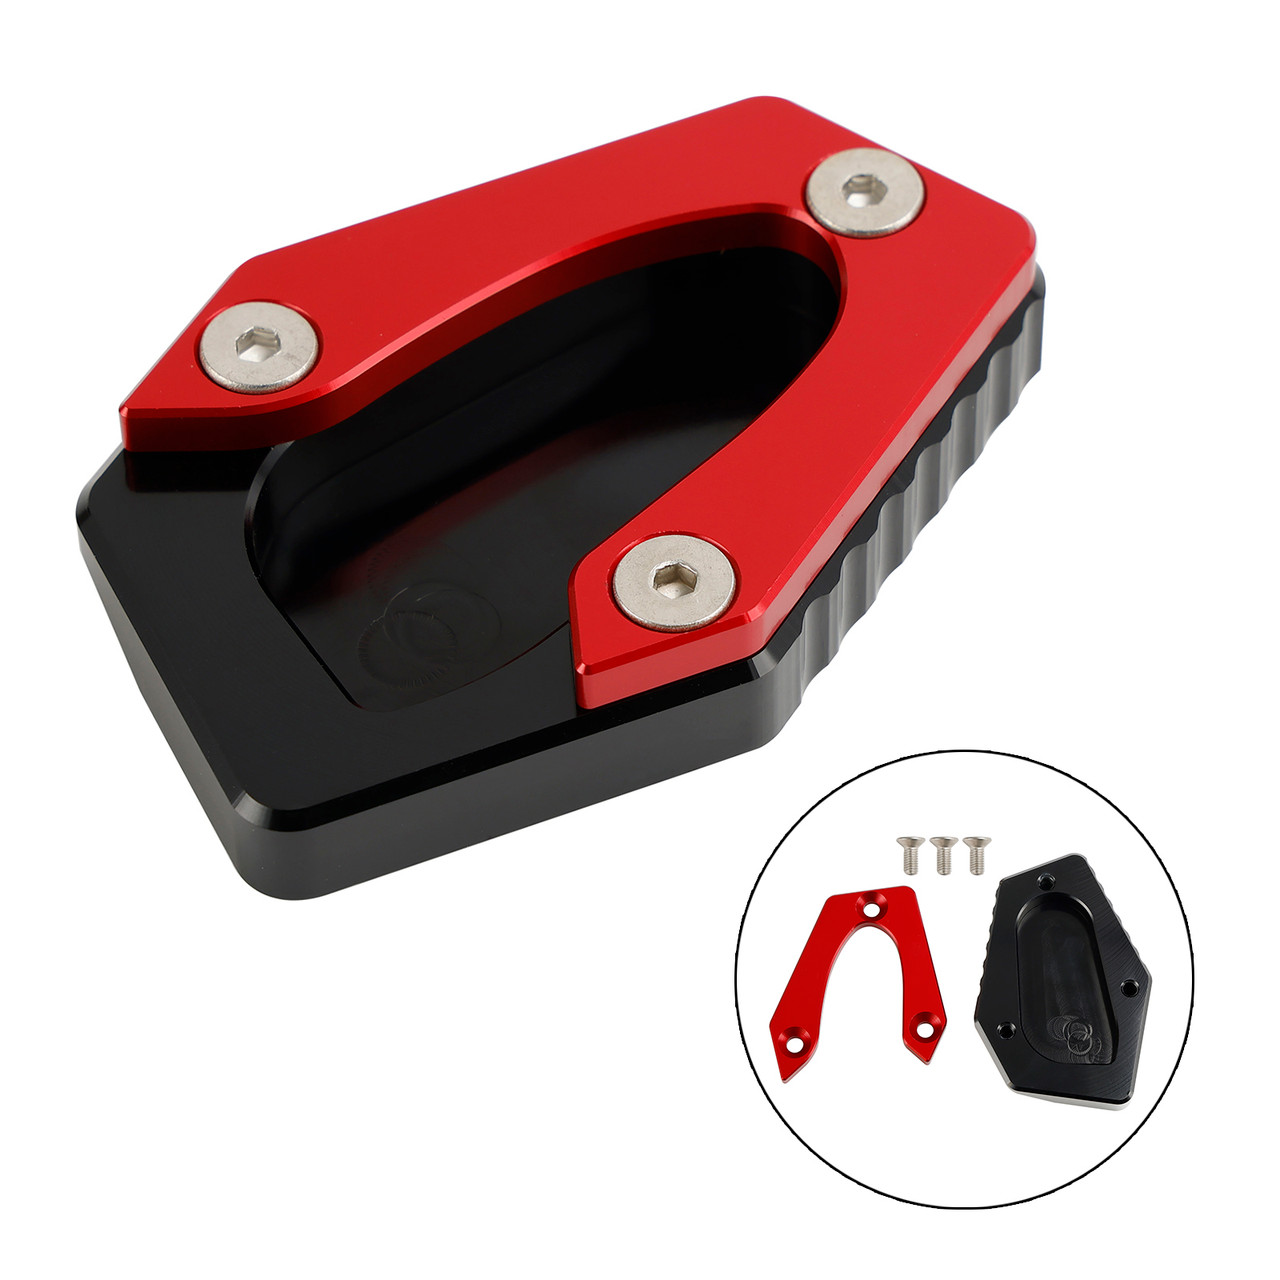 Kickstand Enlarge Plate Pad fit for Speed Twin 900 22-23 Street Cup 900 17-18 RED